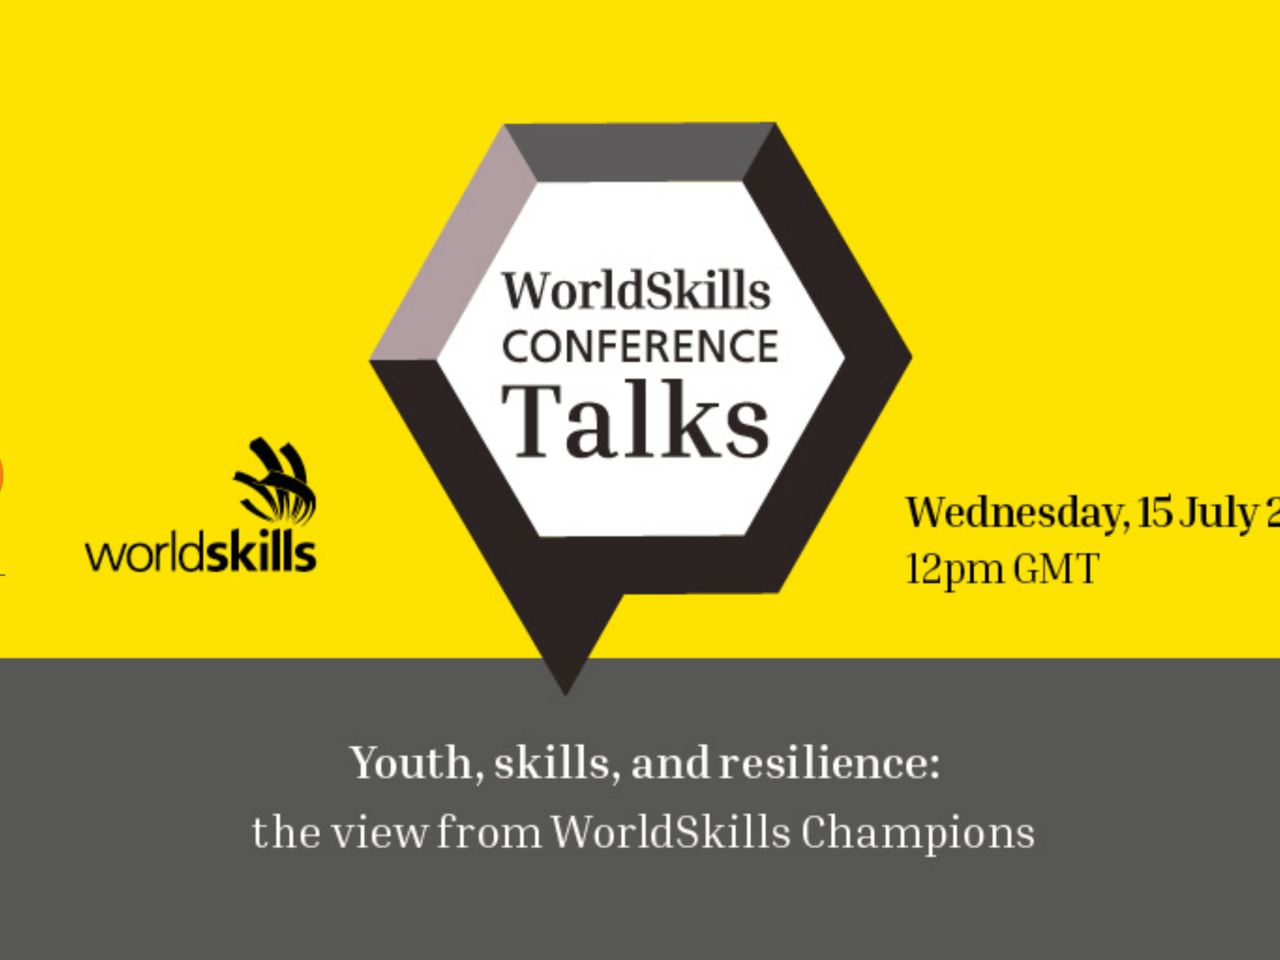 Youth, skills, and resilience: the view from WorldSkills Champions